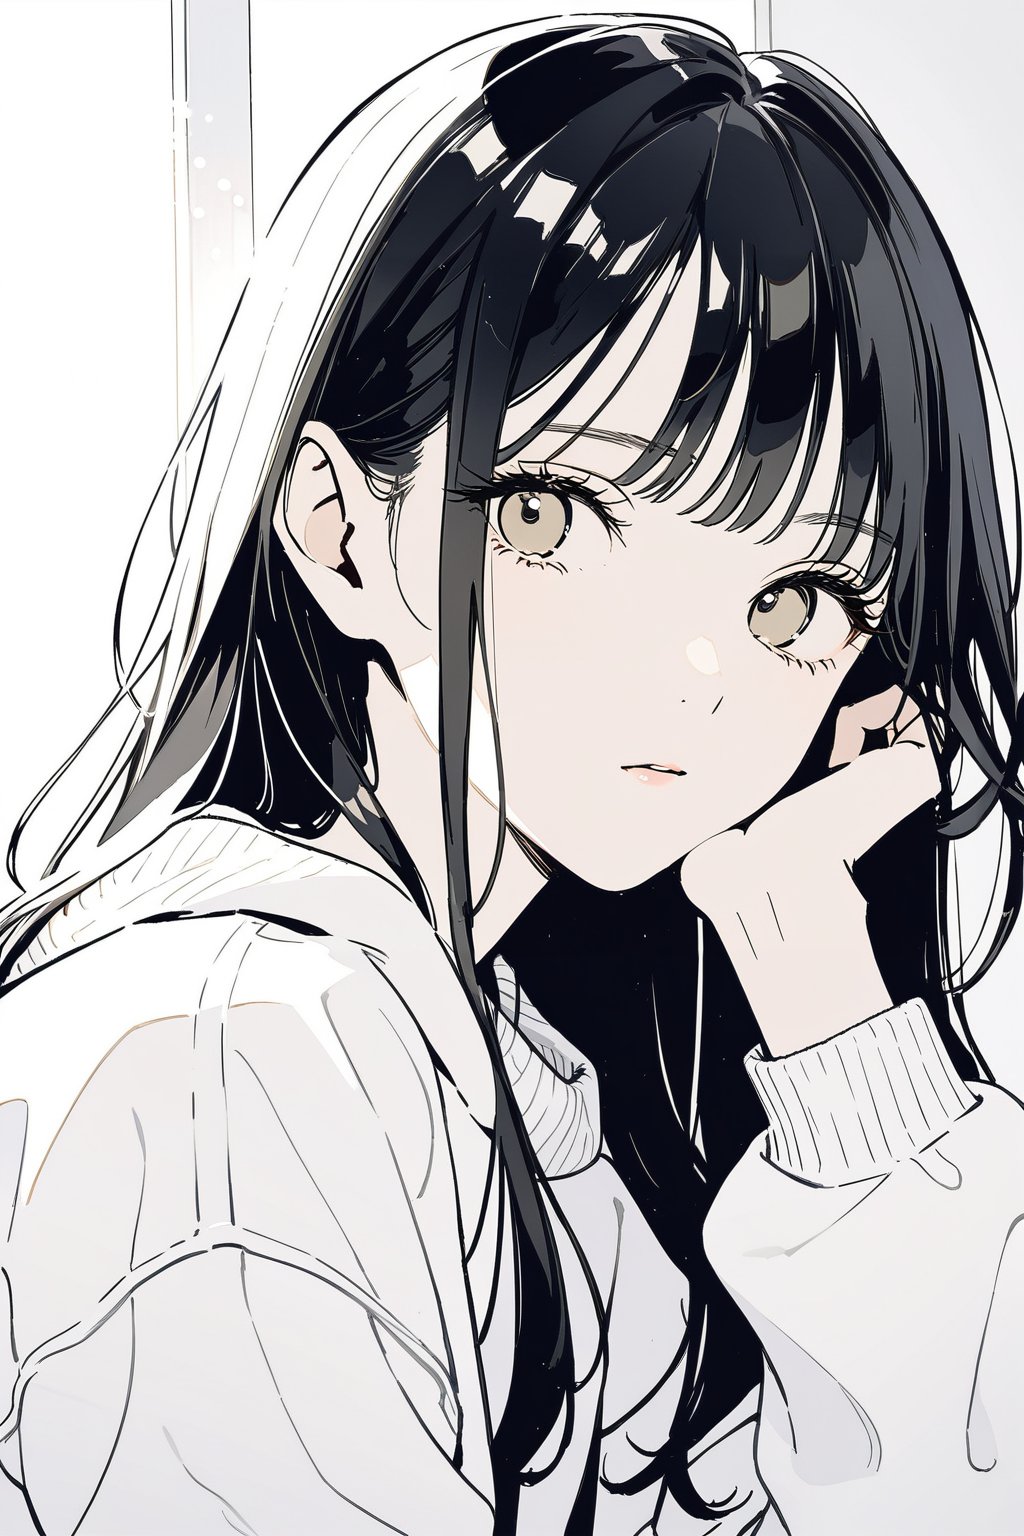 1girl, solo_female, long hair, black hair, masterpiece, white sweatshirt, gold eyes, cold expression, looking_at_the_viewer, wearing white denim shorts, portrait, closeup, tall girl, simple_background, indoors, chinese interior, rim lighting, dramatic lighting, beautiful, lineart,txznf